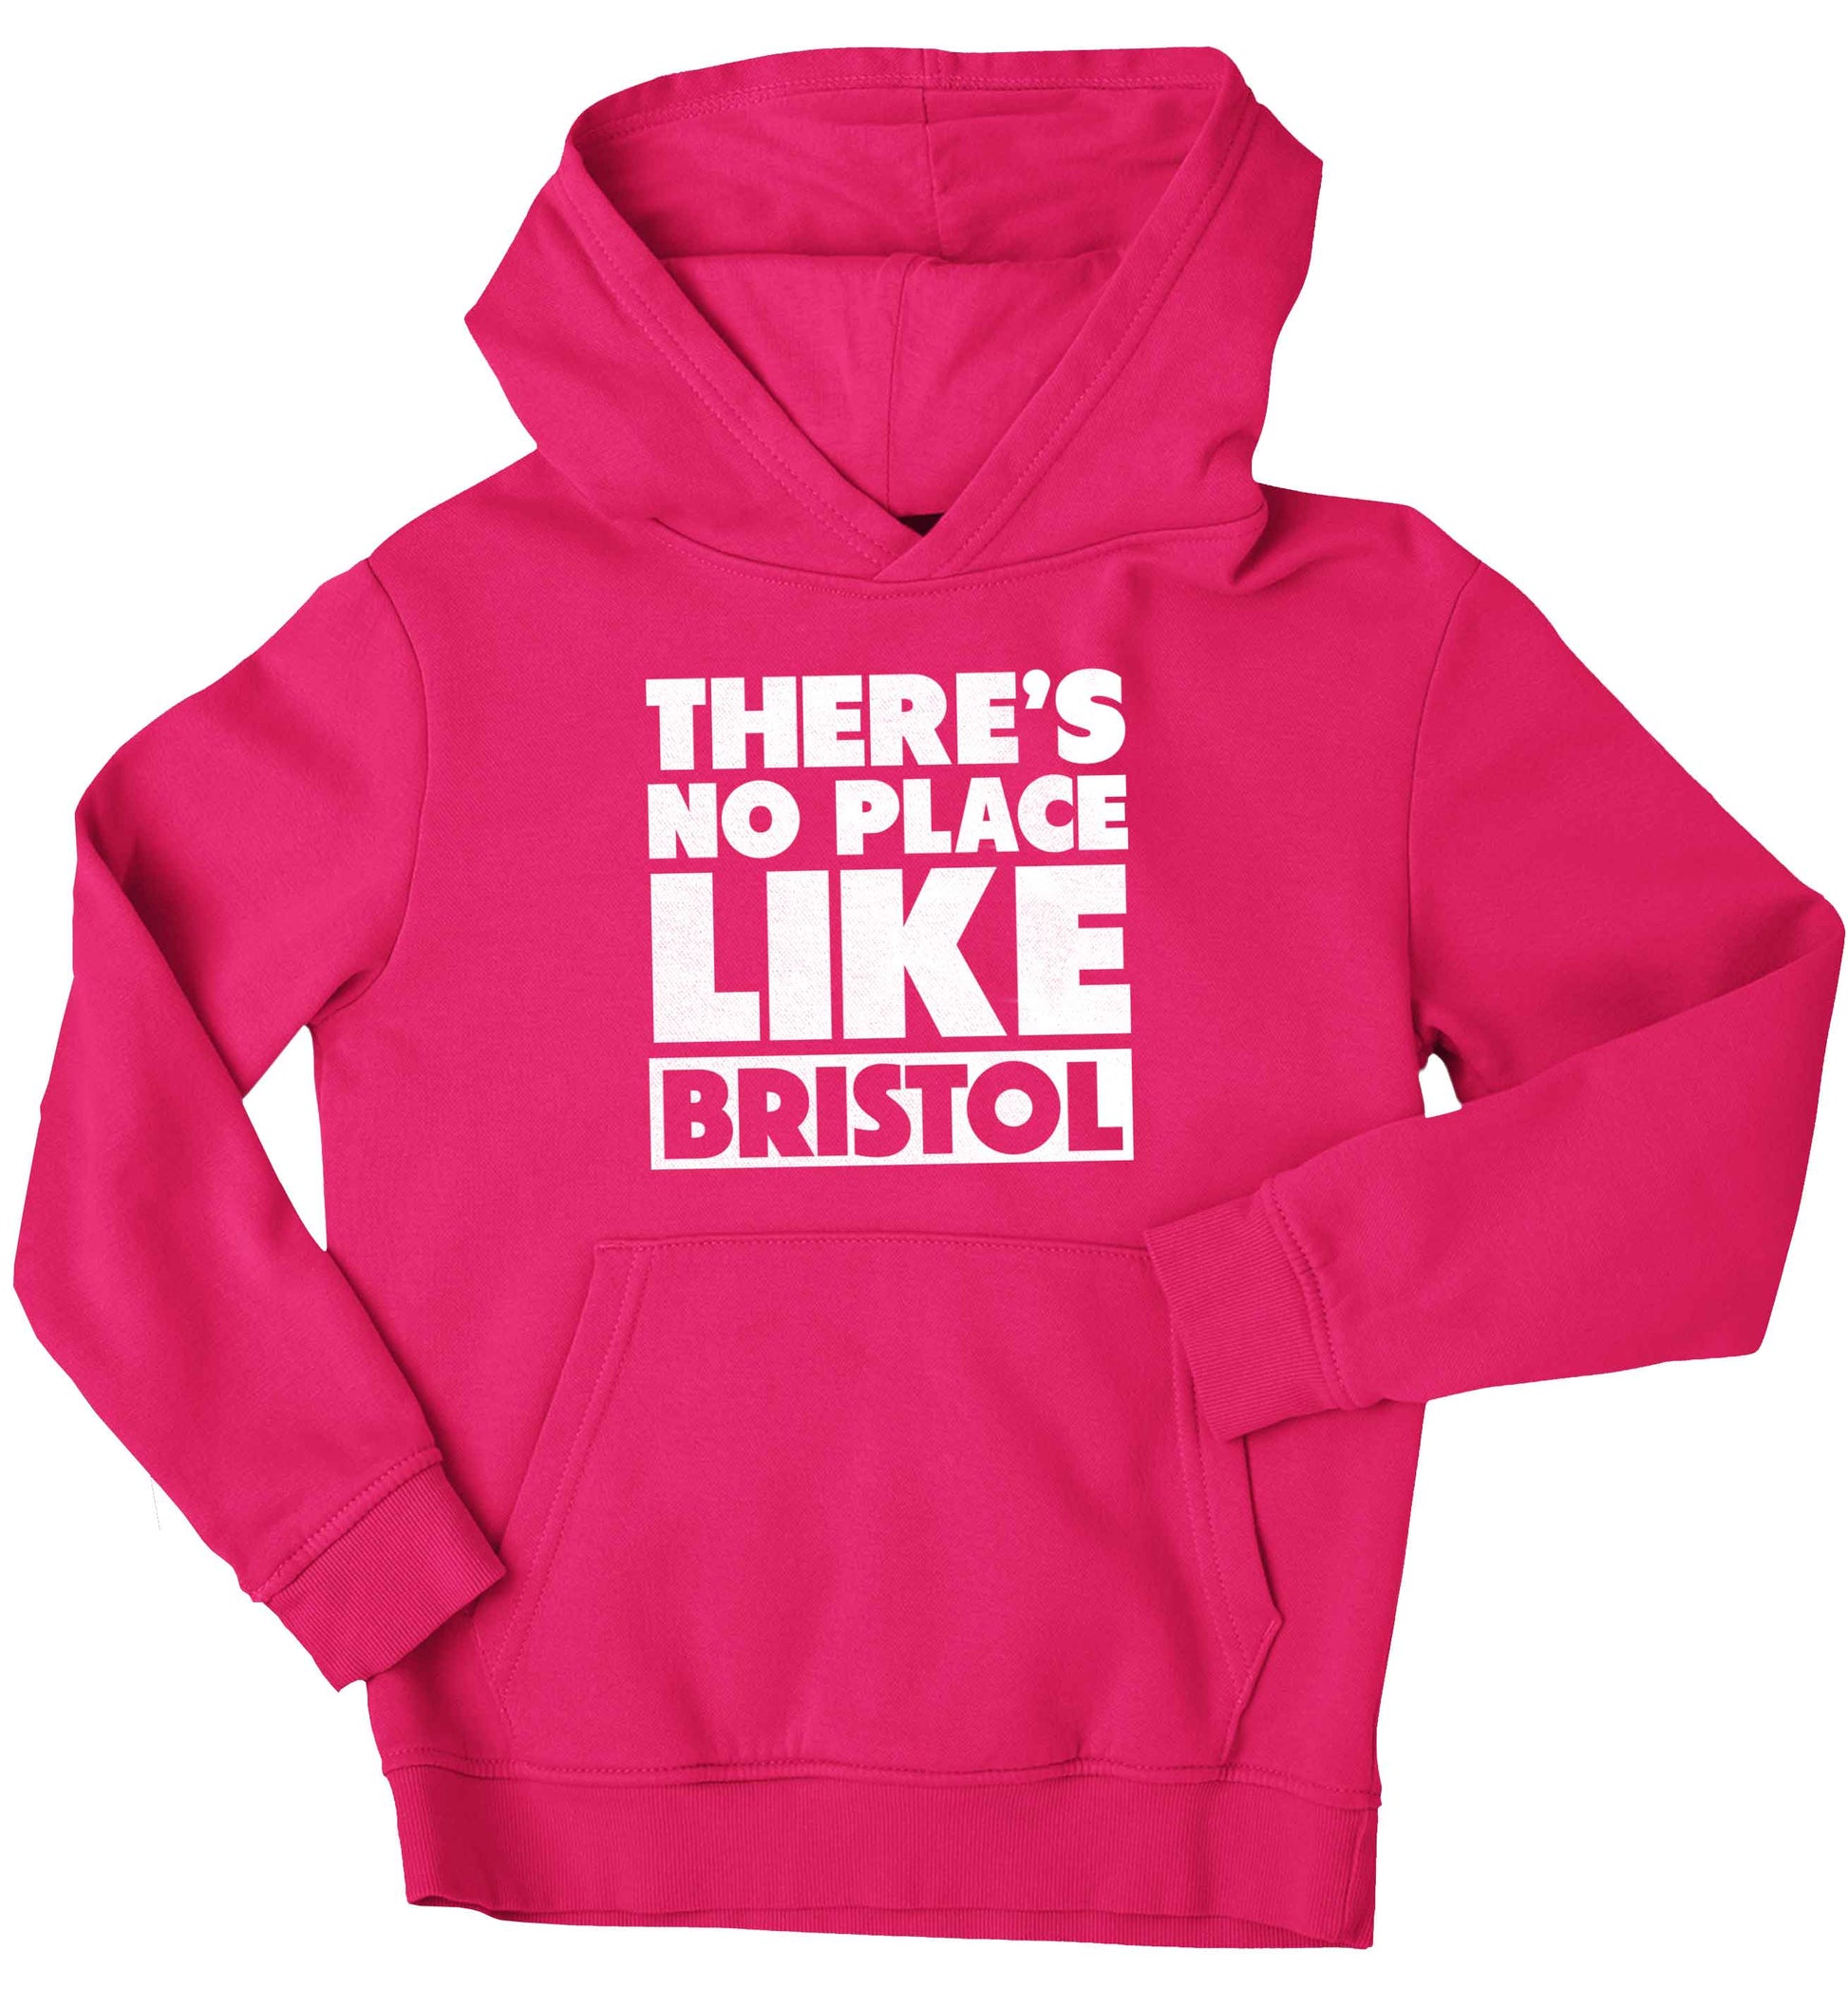 There's no place like Bristol children's pink hoodie 12-13 Years